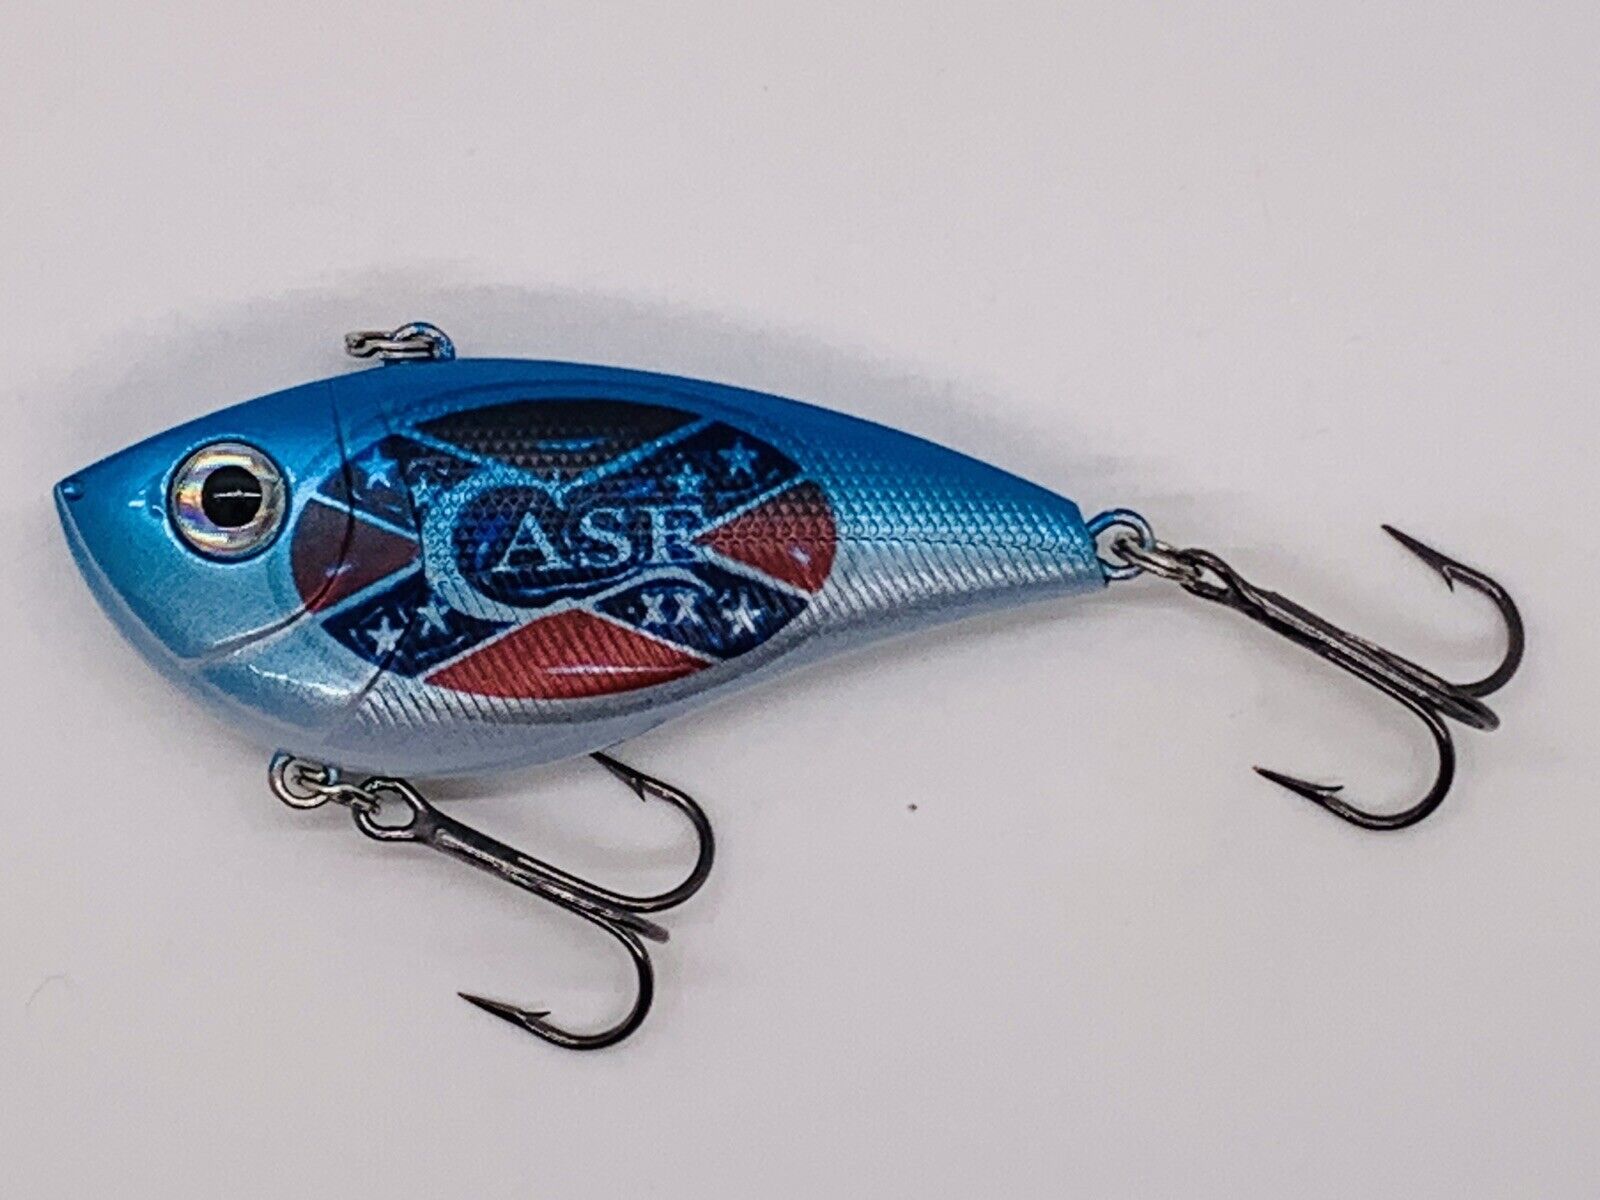 Case XX  Fishing Lure In Excellent Condition With .